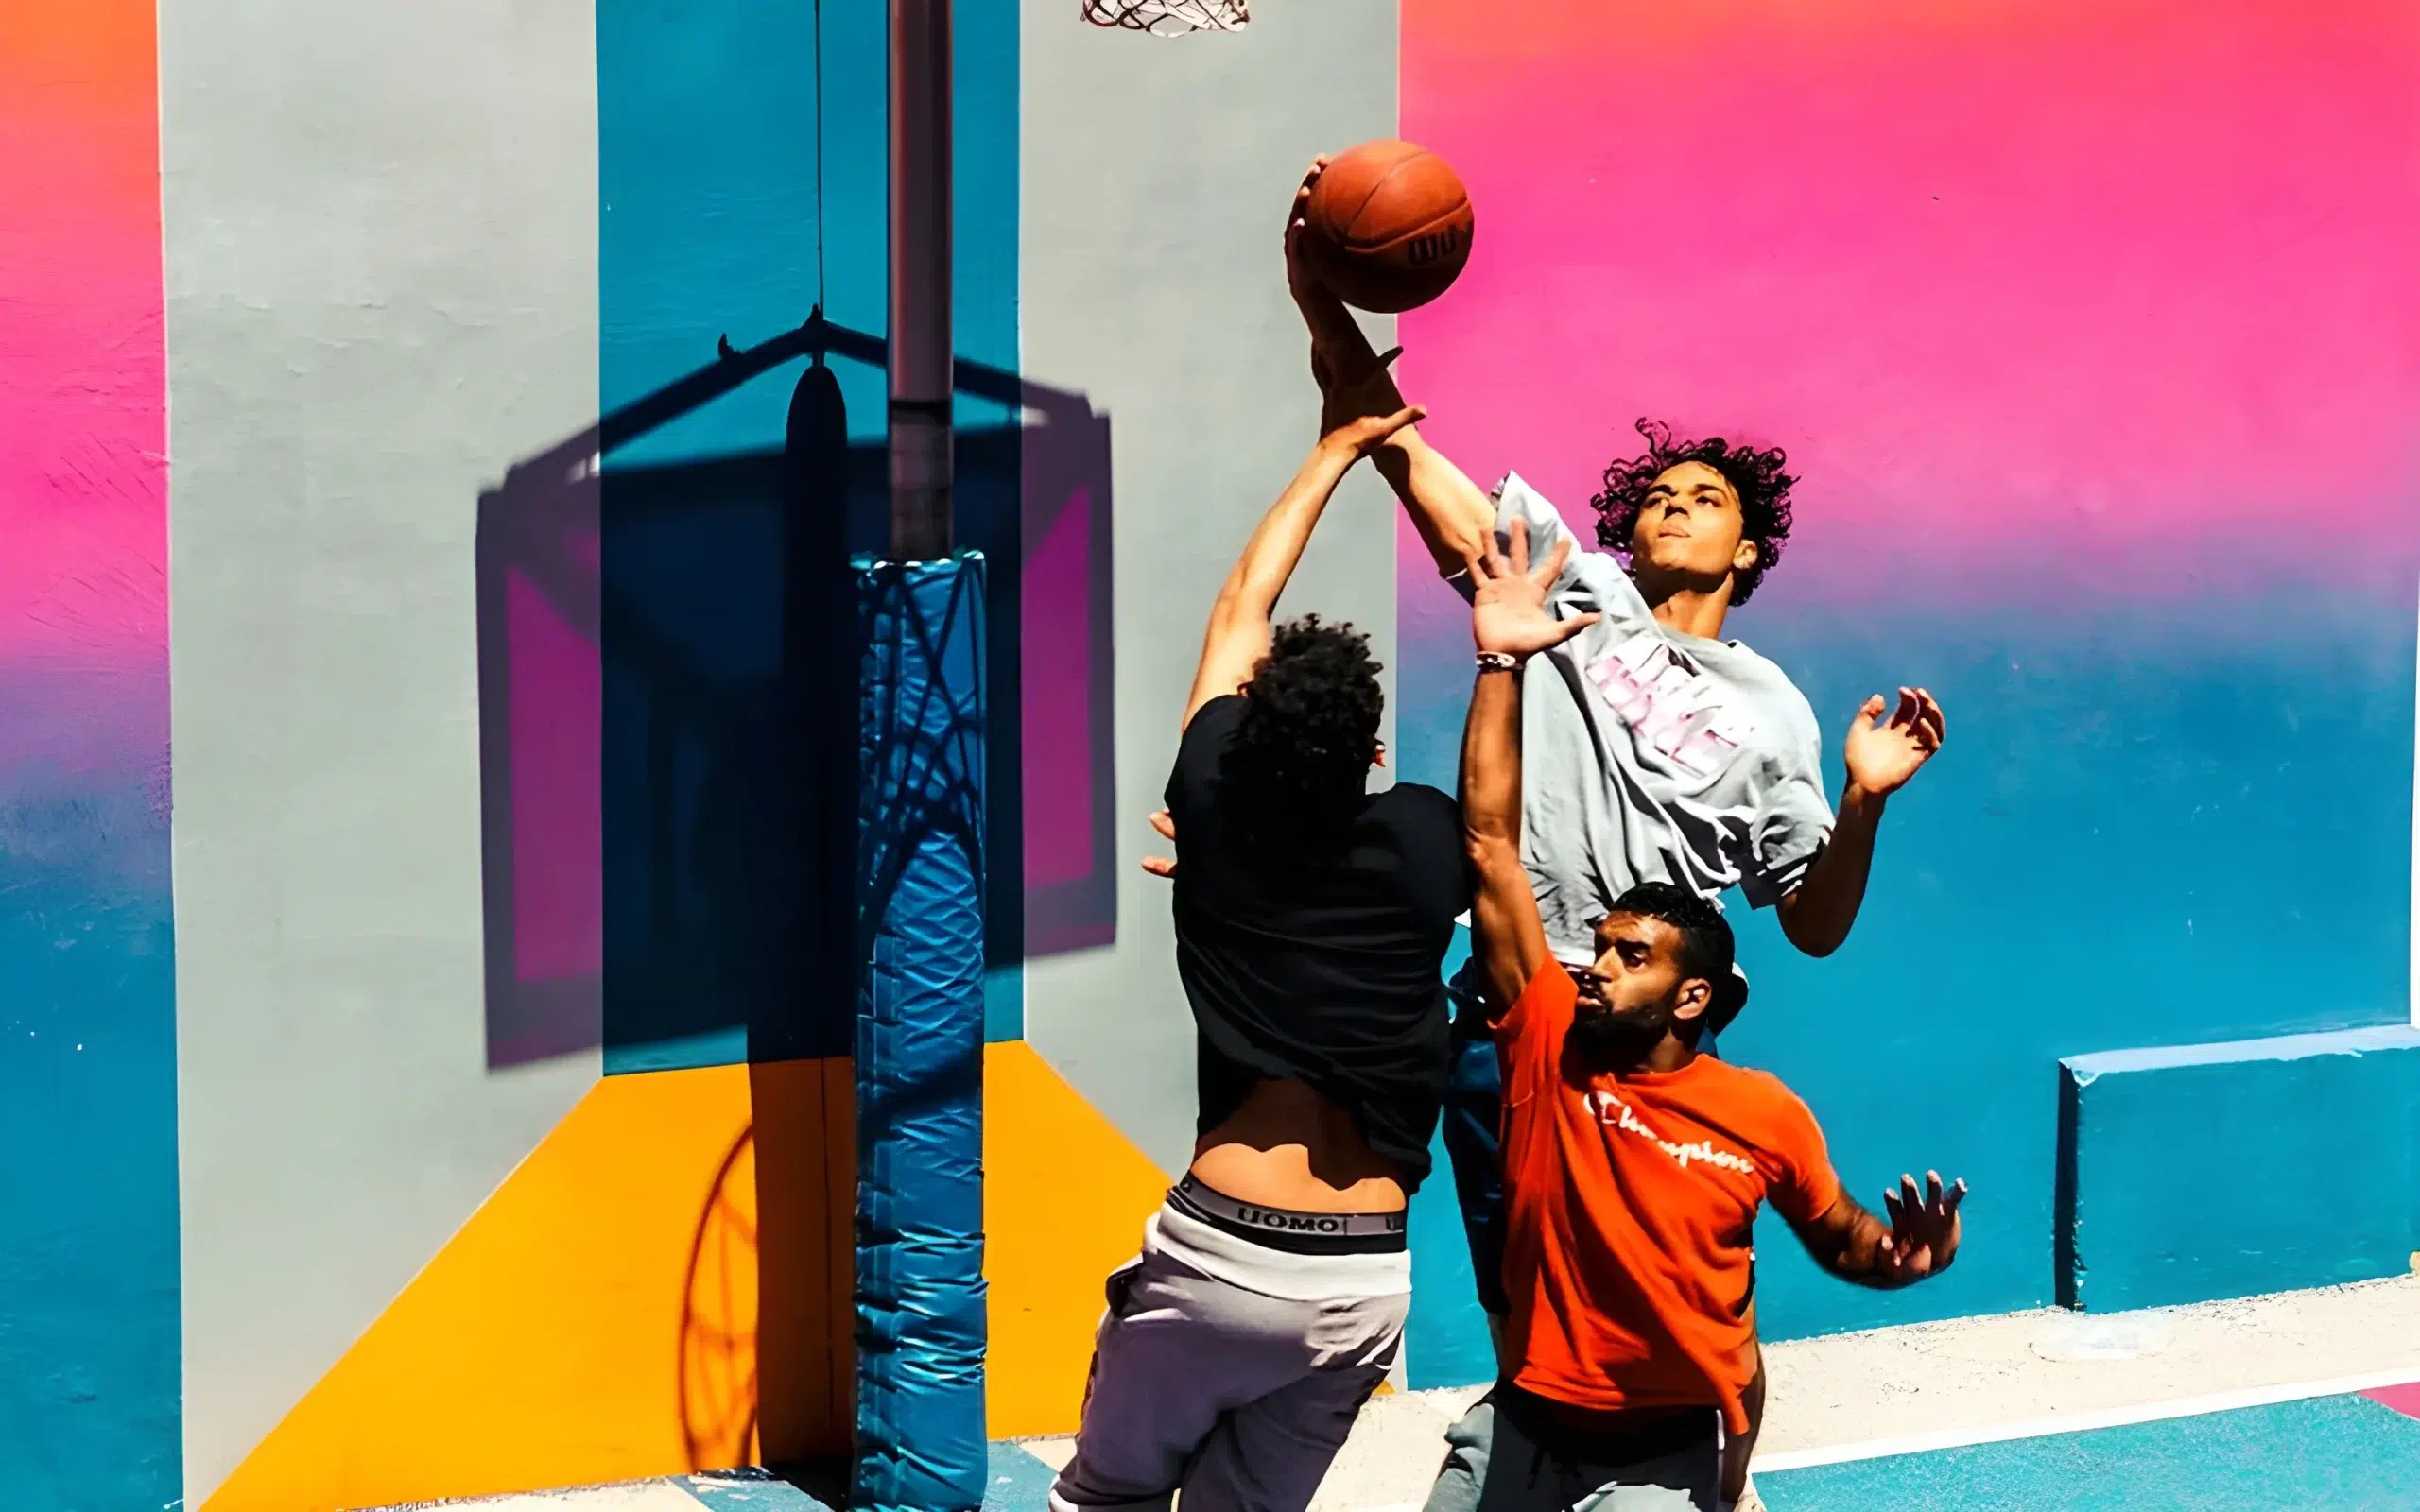 A group of young men playing basketball in front of a vibrant wall.